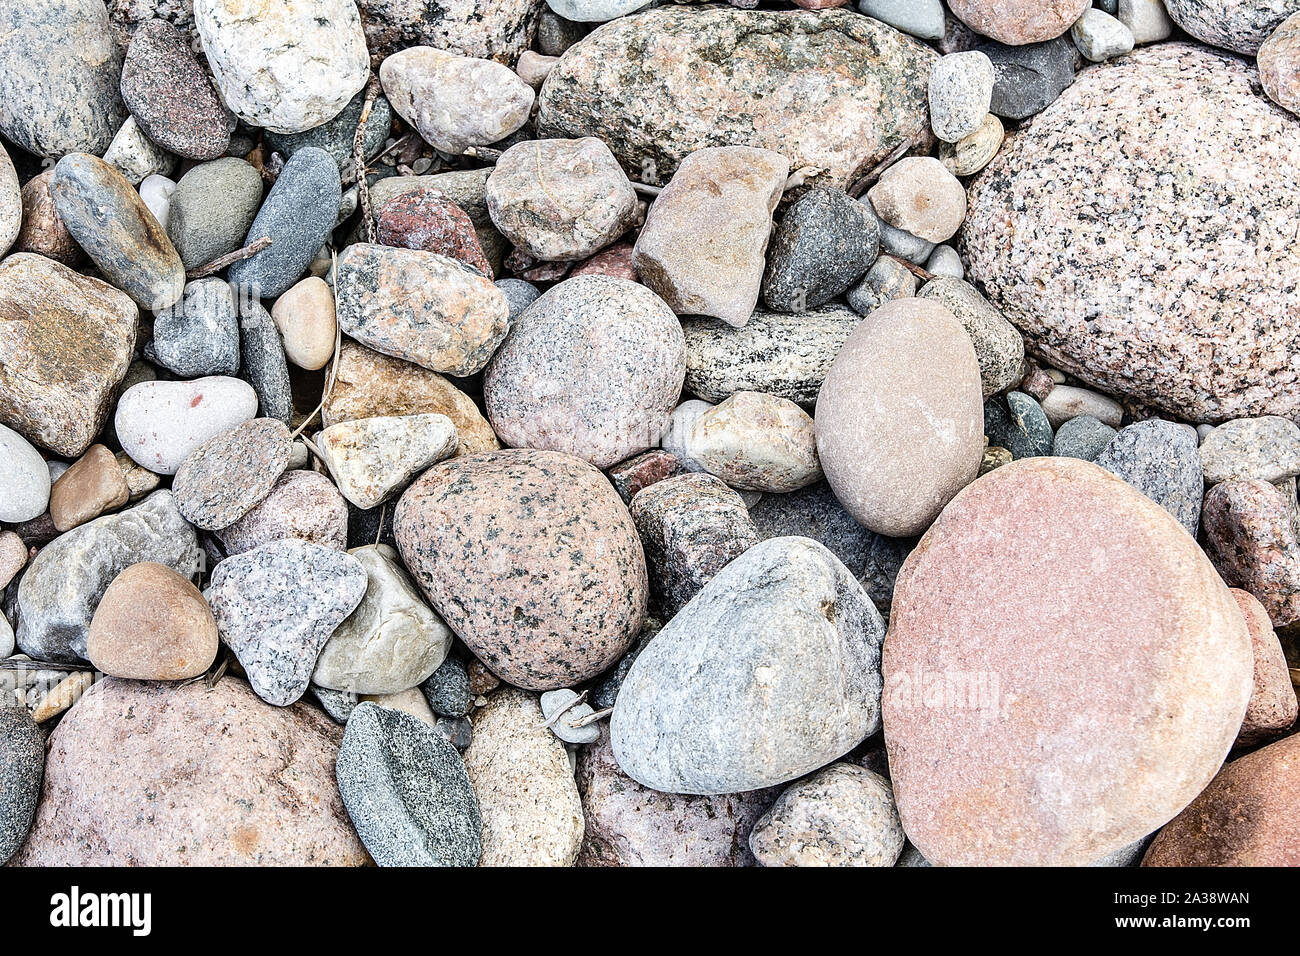 Many colorful stones on the beach background Stock Photo